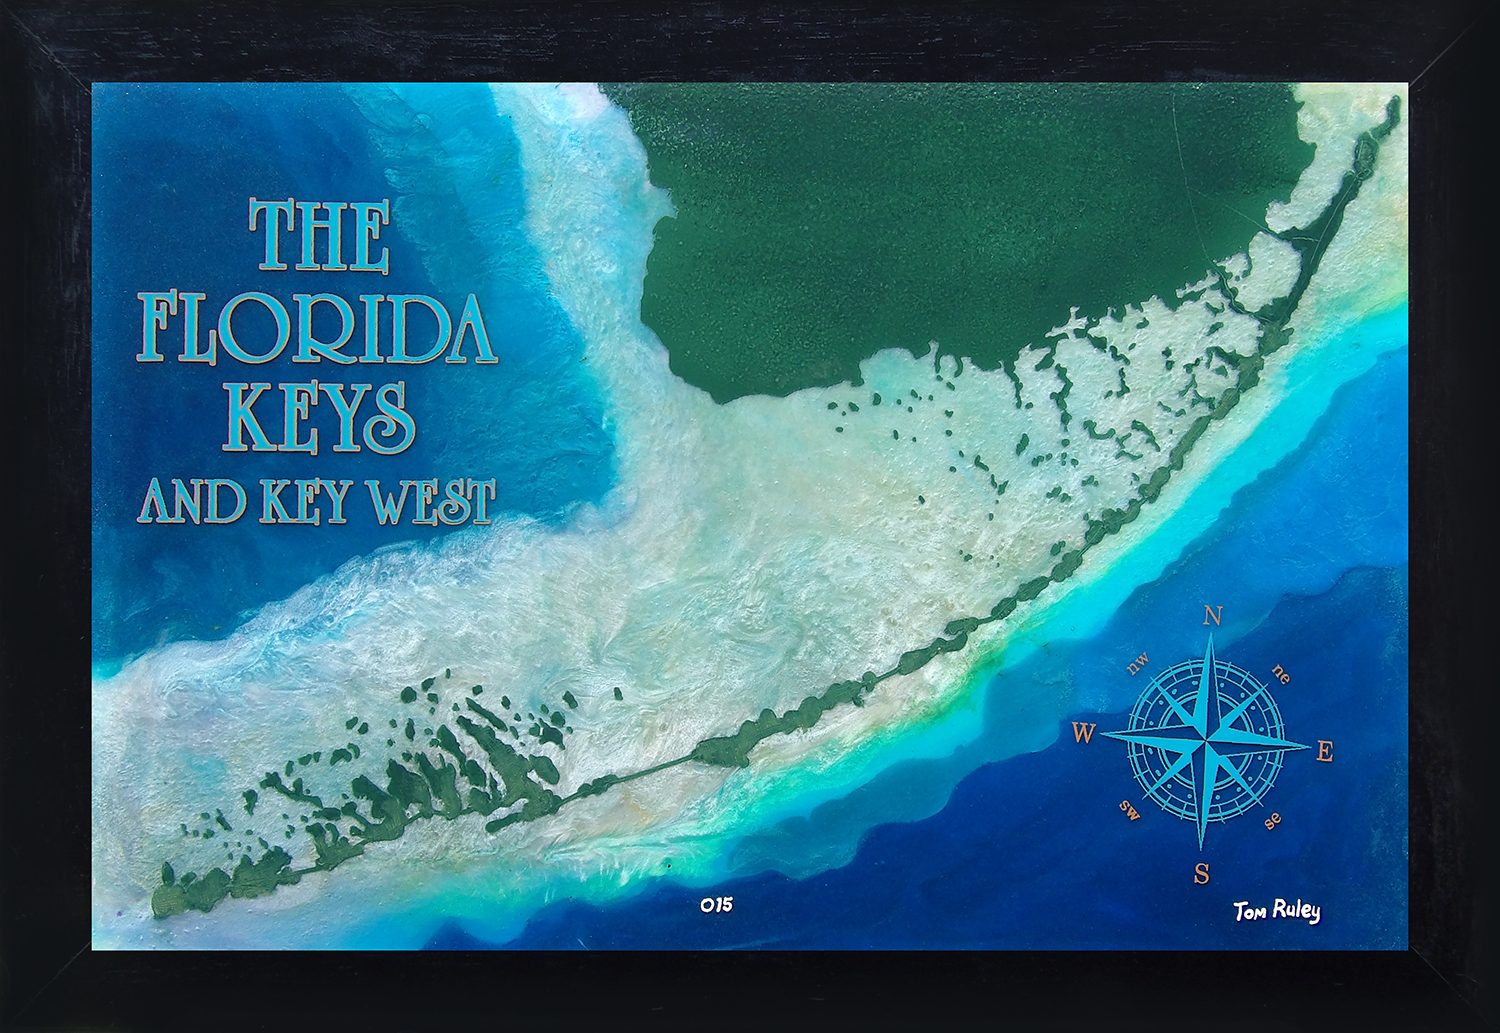 3-D Framed Screenprinted and Epoxy Resin Art of The Florida Keys and Key West